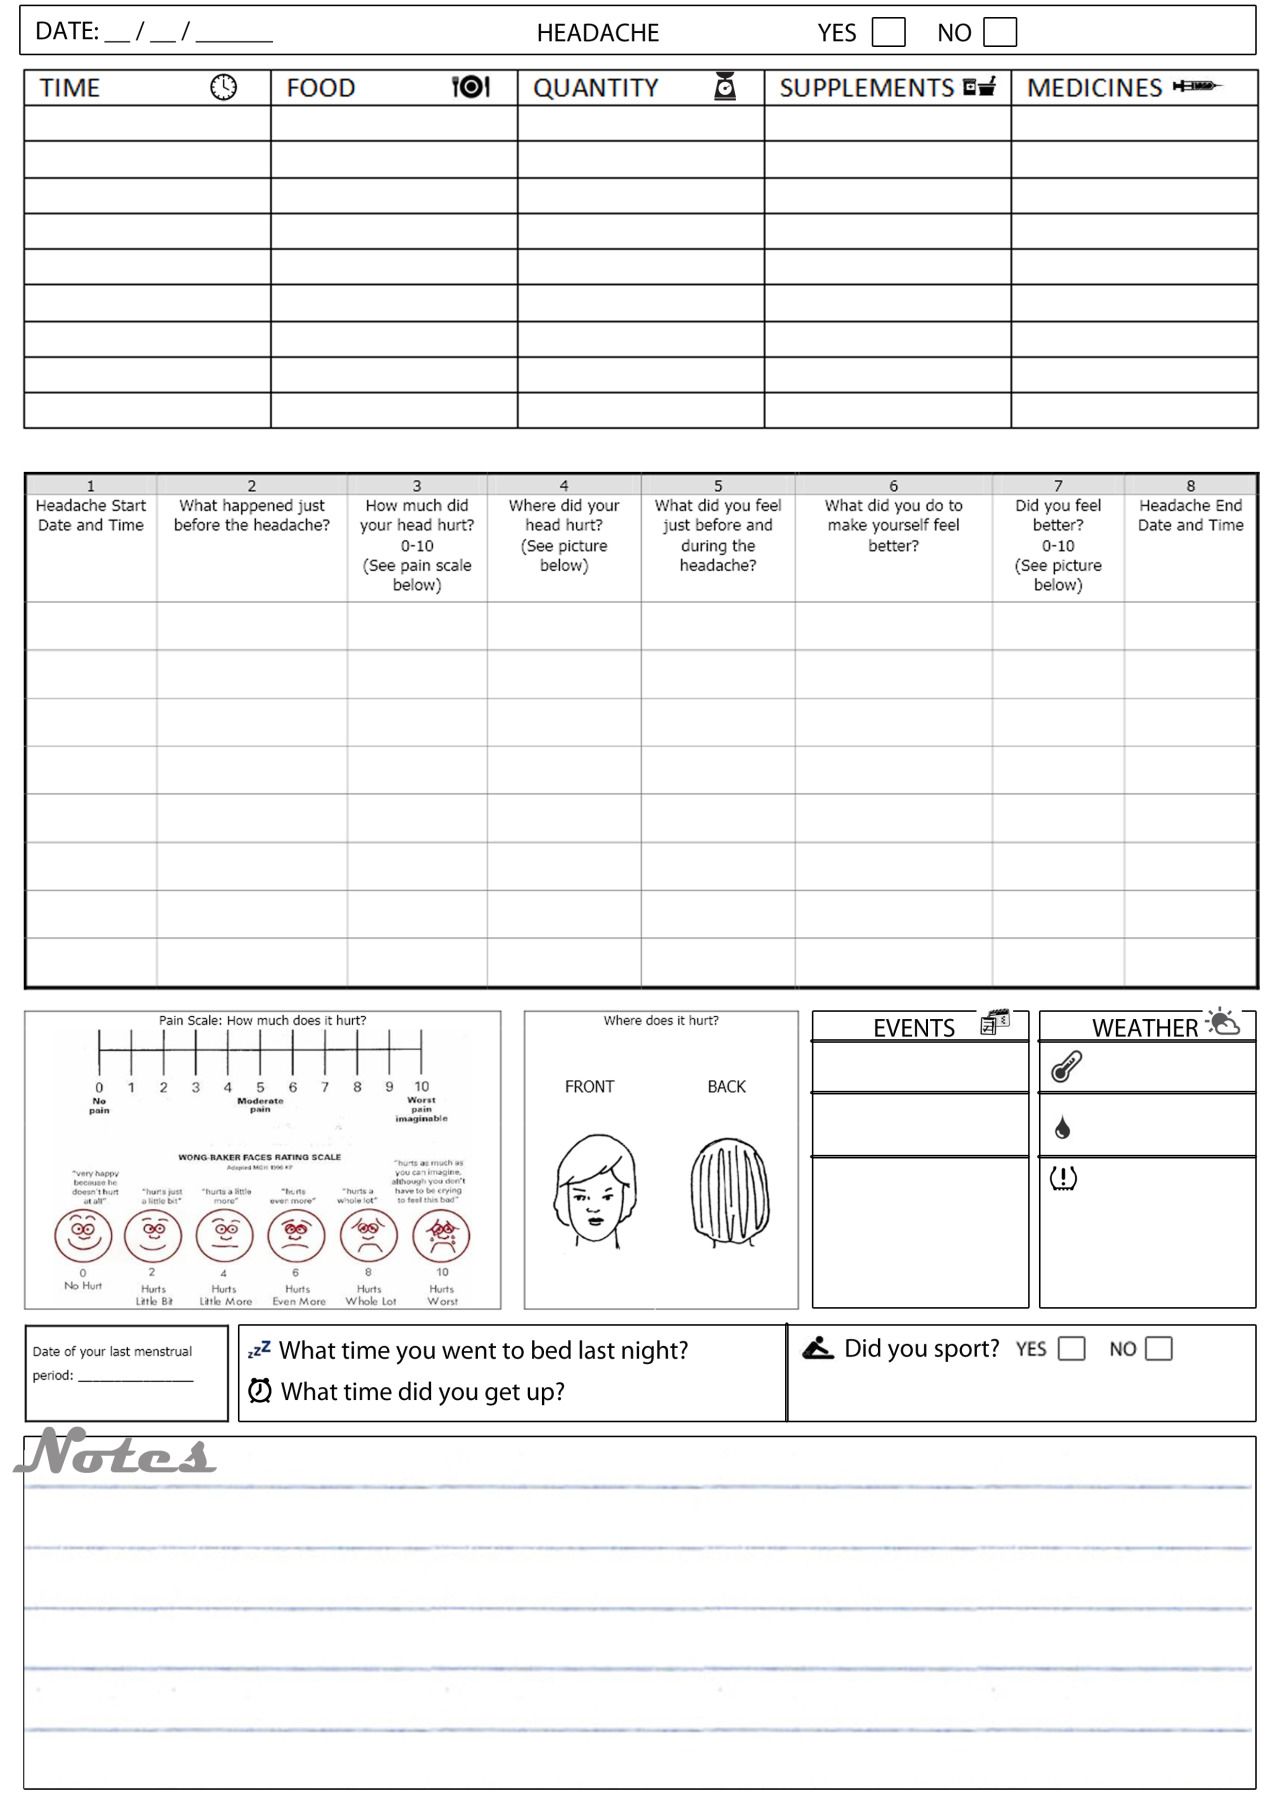 Headache Diary   free printable. Useful for tracking down possible 